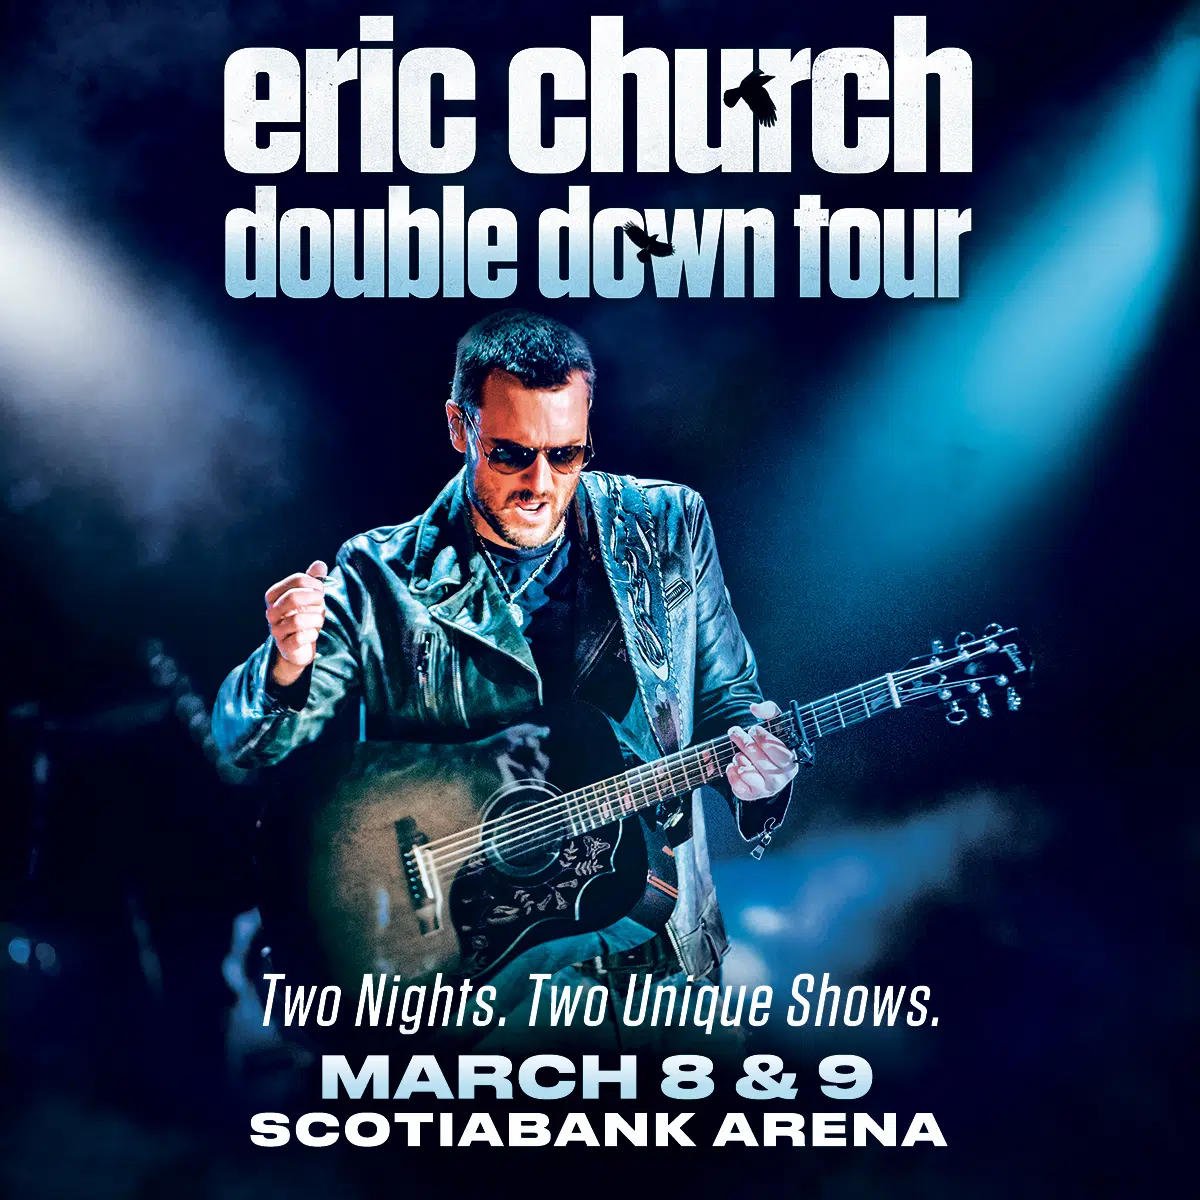 Eric Church And You!